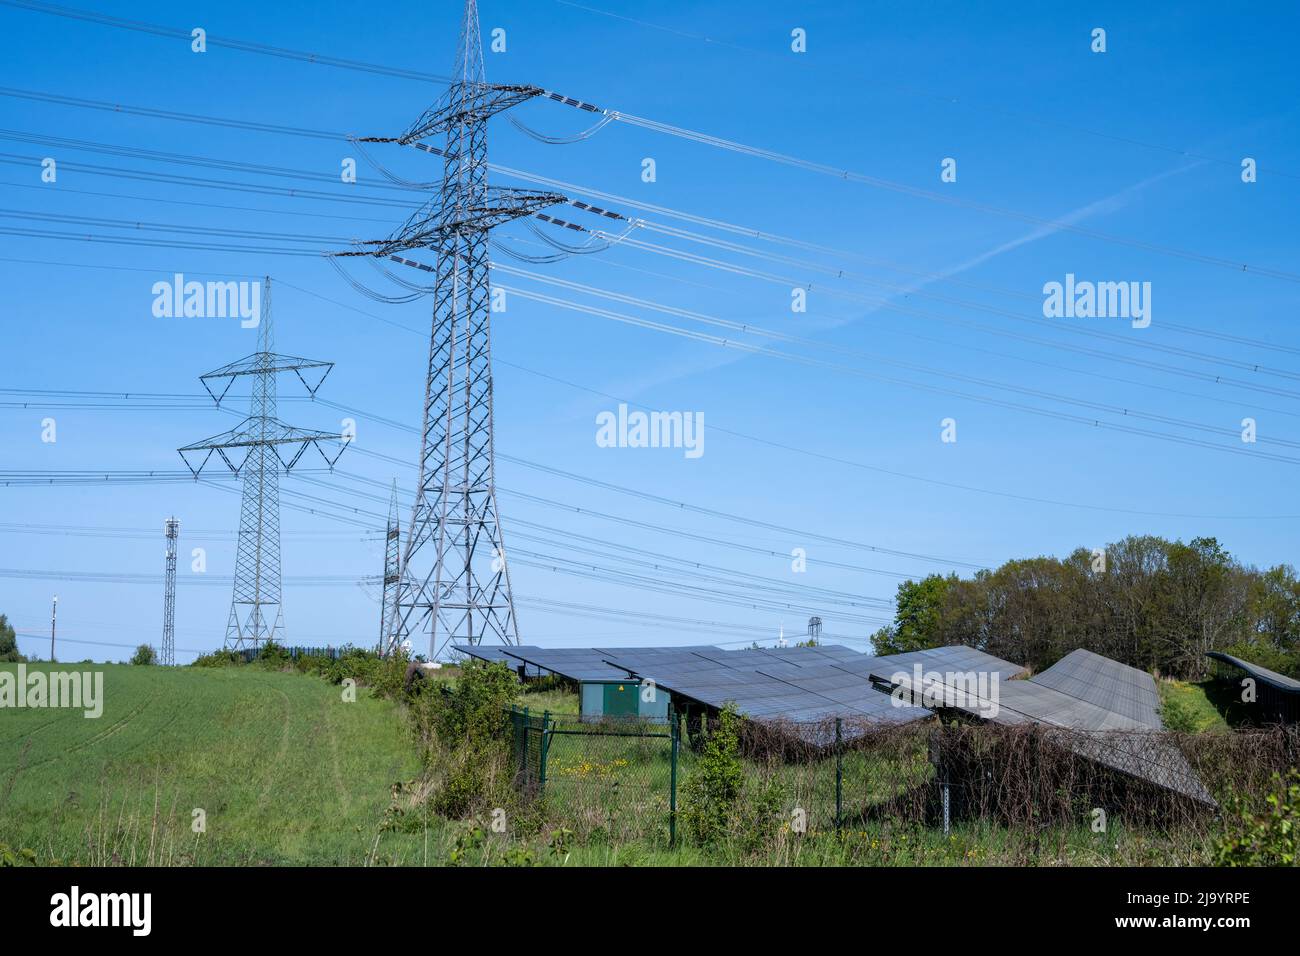 Power lines with pylons and a solar power plant seen in Germany Stock Photo